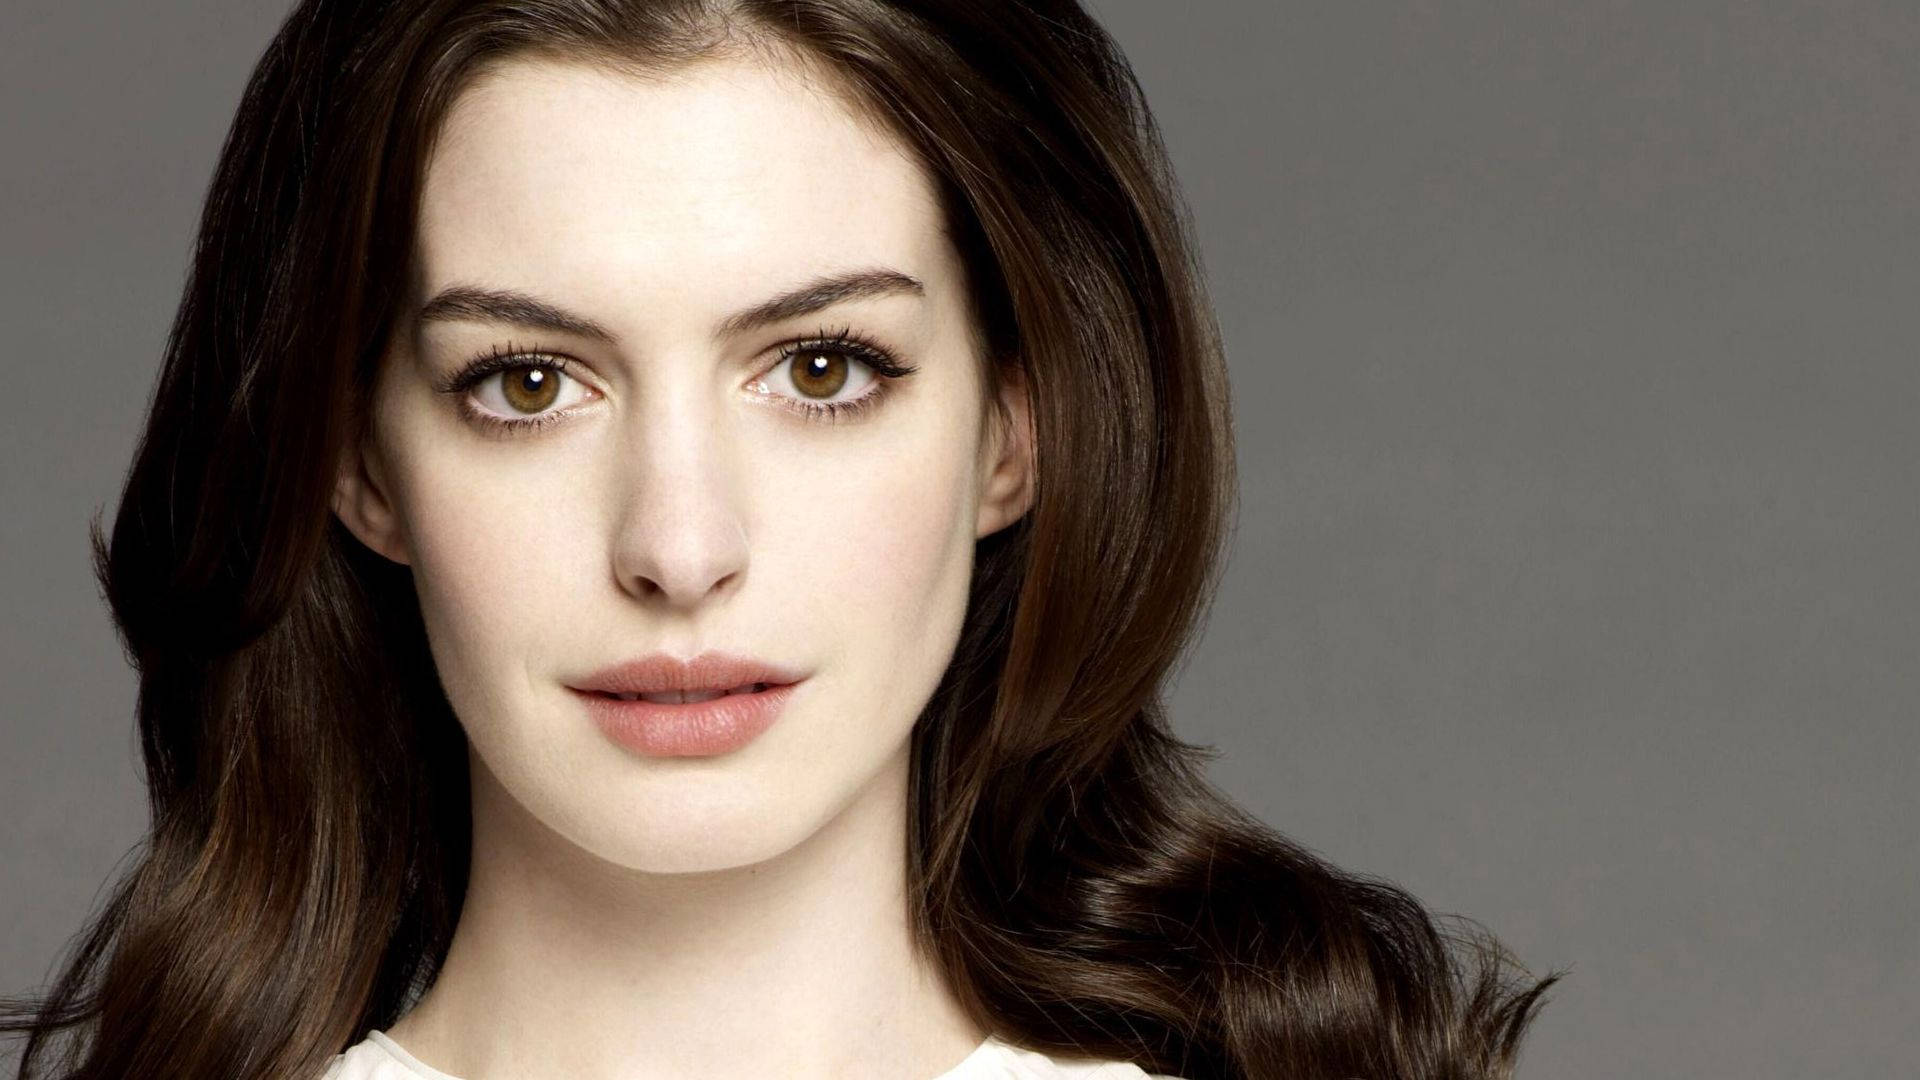 Exquisite Portrait Of Actress Anne Hathaway Background